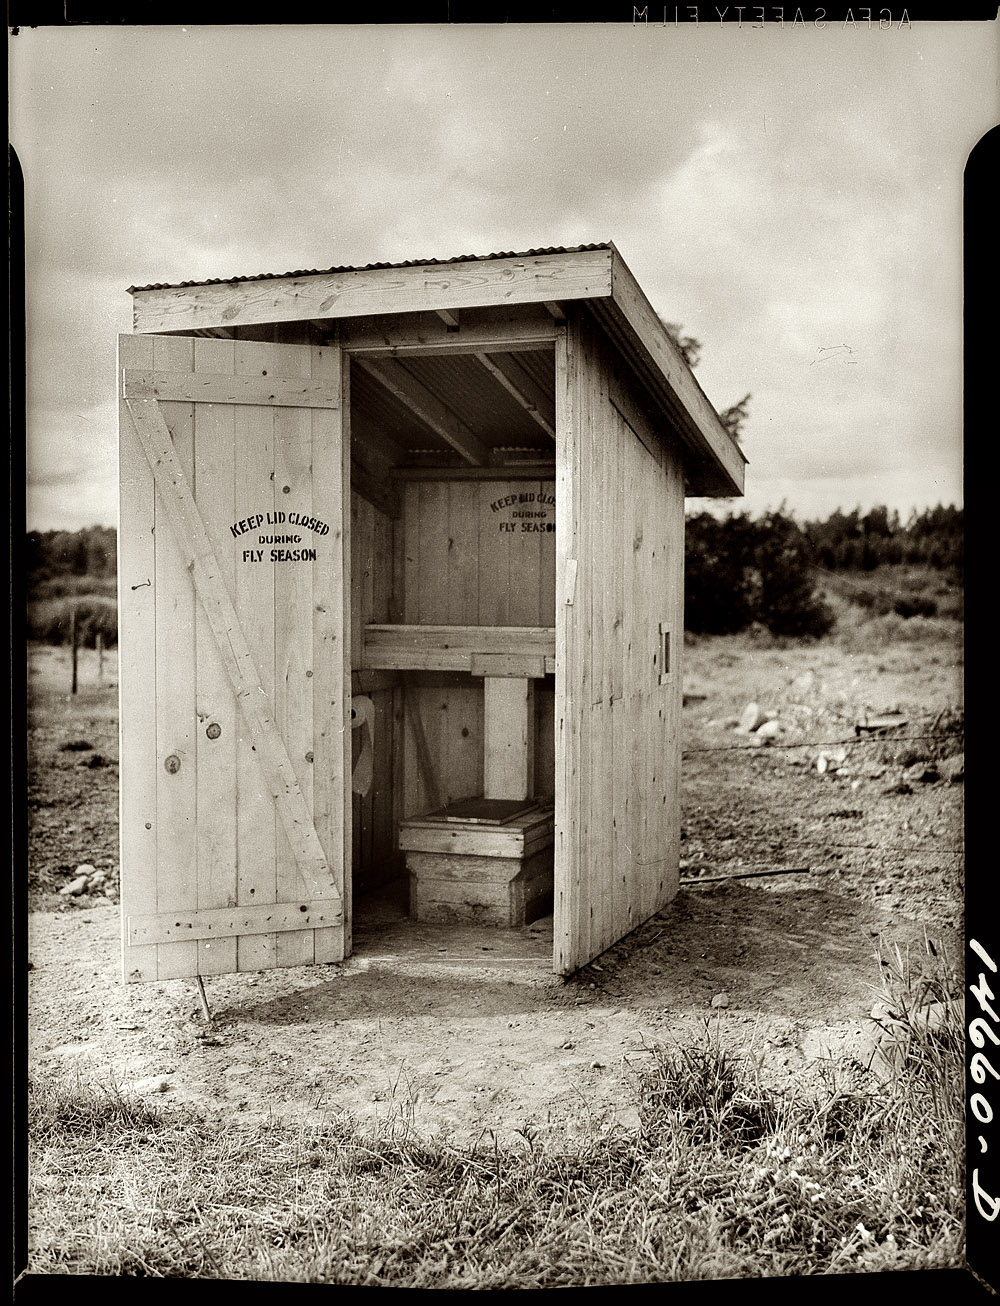 Minnesota, 1941. "Complete sanitary privy properly protected to prevent flies from spreading diseases. Concrete floor slab, riser stool and building are fabricated at central yard for environmental sanitation program." View full size. Medium format safety negative by Shipman for the Farm Security Administration.